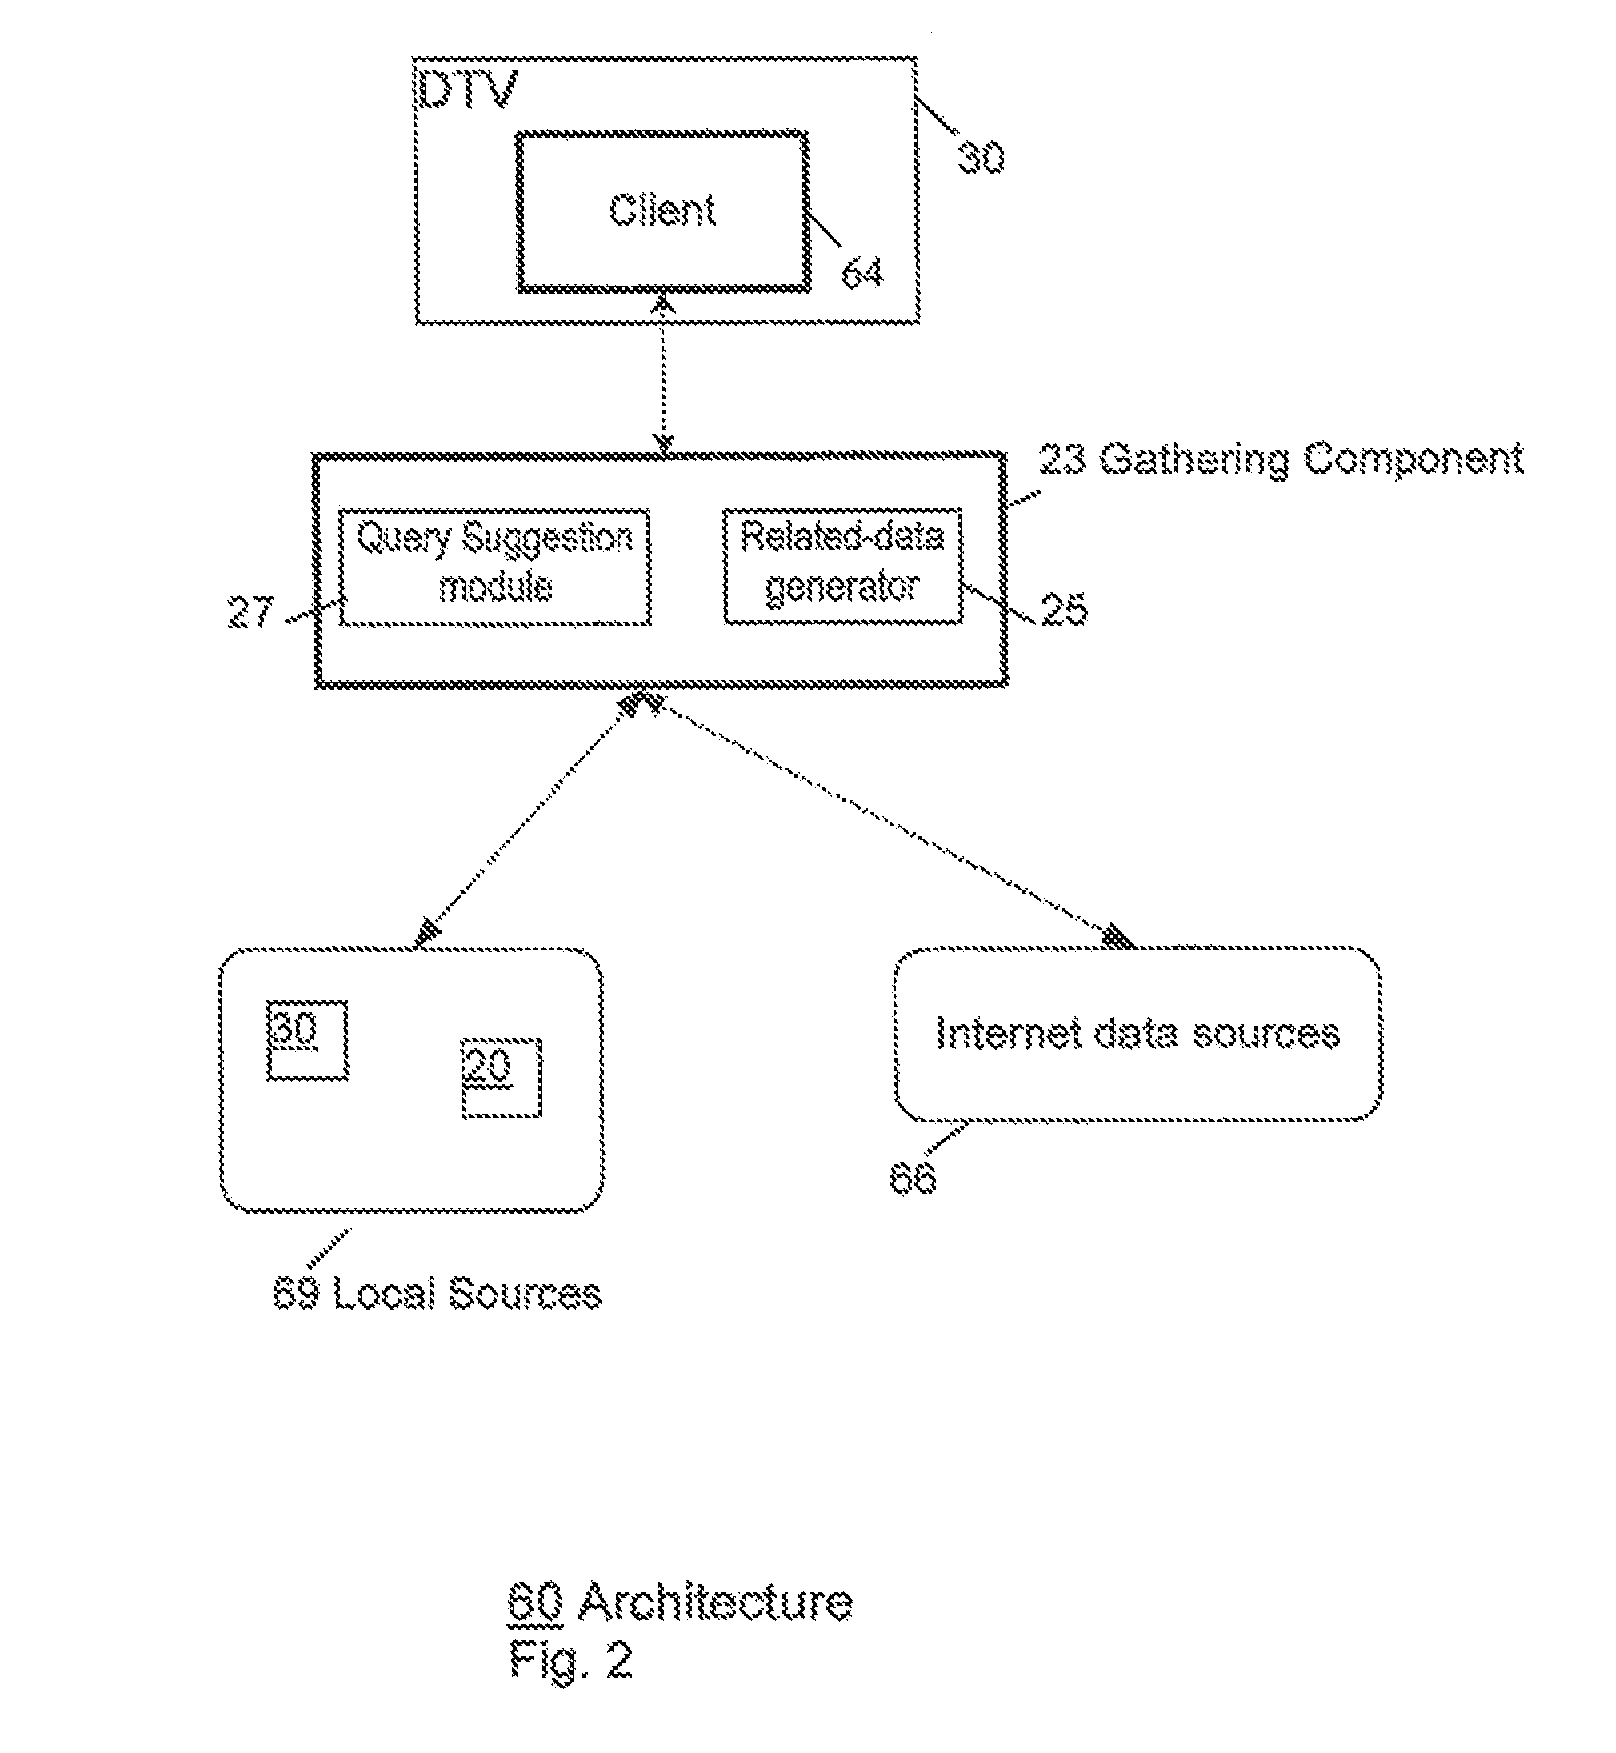 Method and system for suggesting search queries on electronic devices